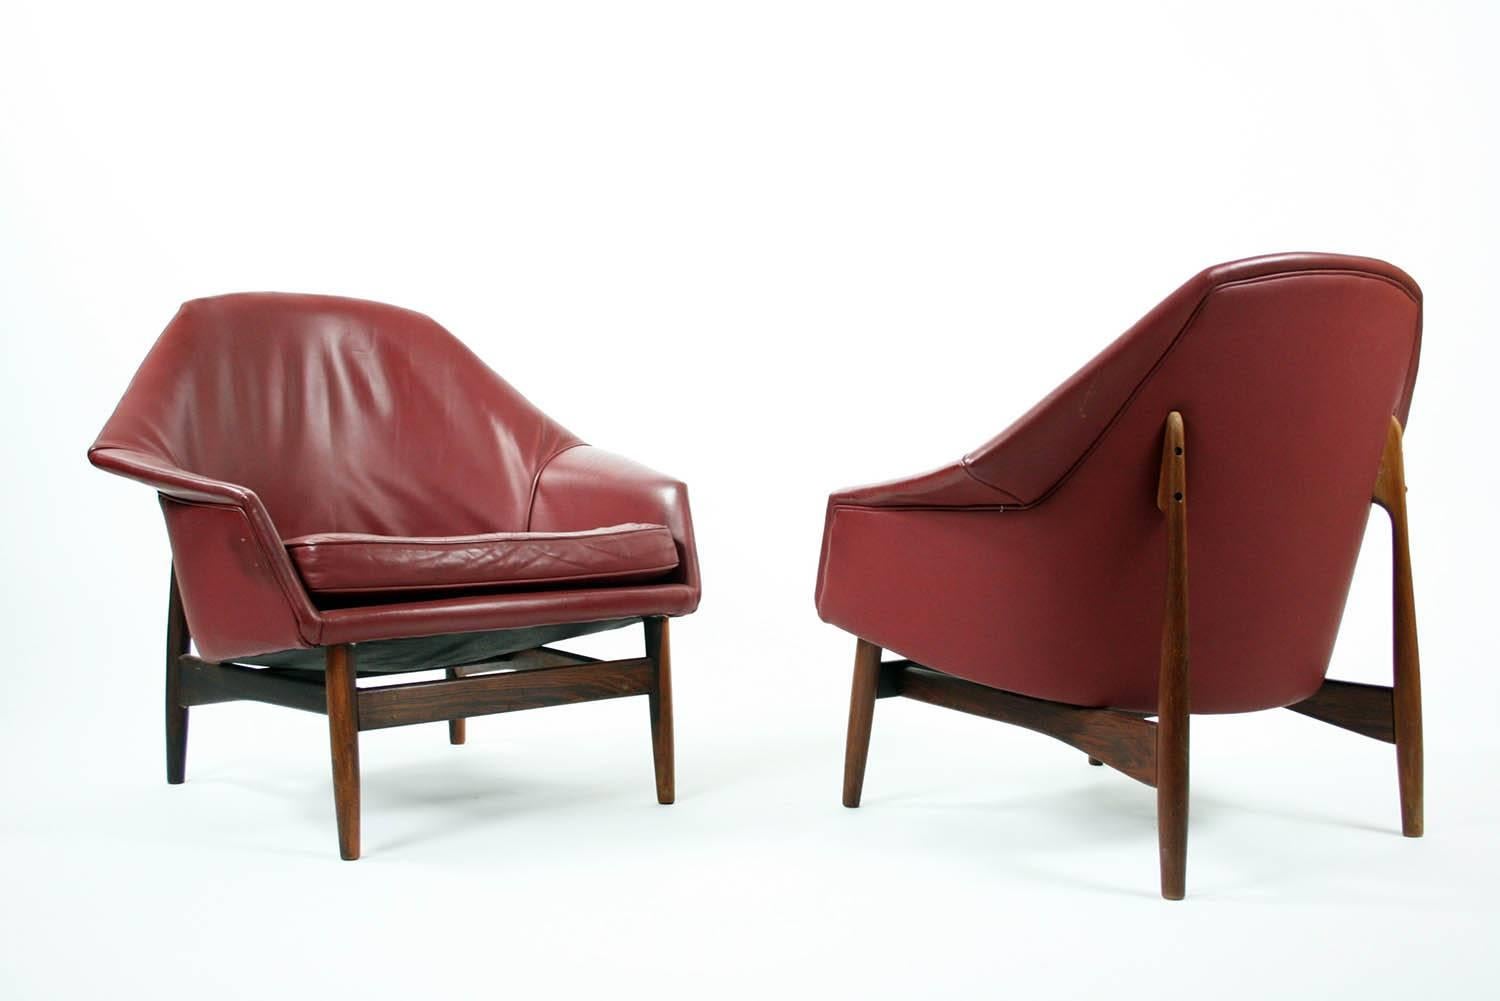 Danish Pair of Rosewood and Leather Lounge Chairs by Ib Kofod Larsen for Carlo Gahrn